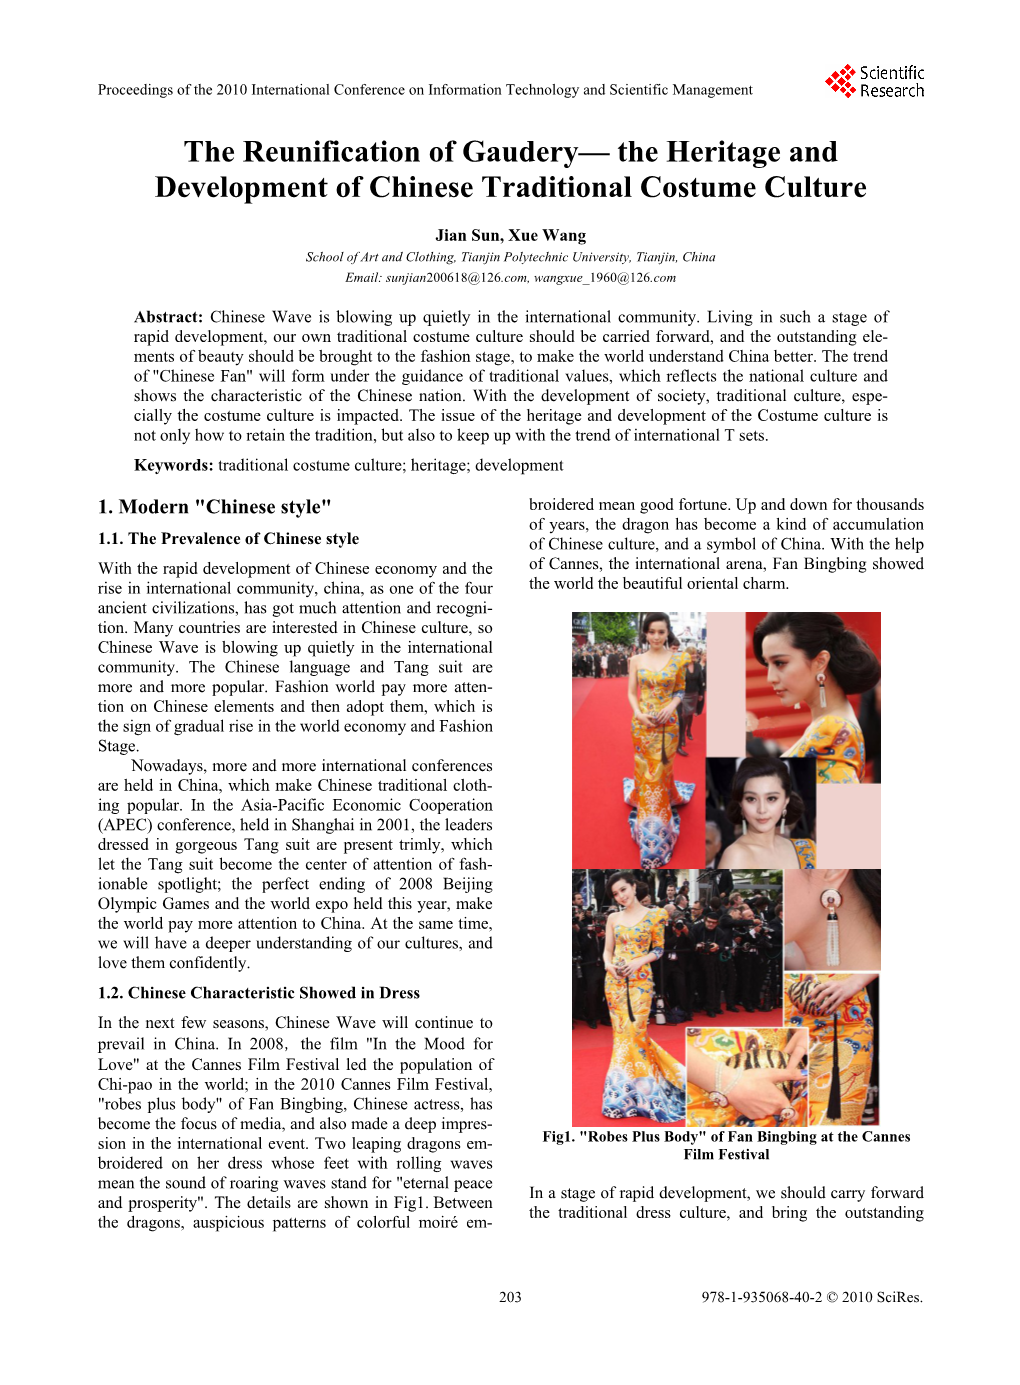 The Heritage and Development of Chinese Traditional Costume Culture